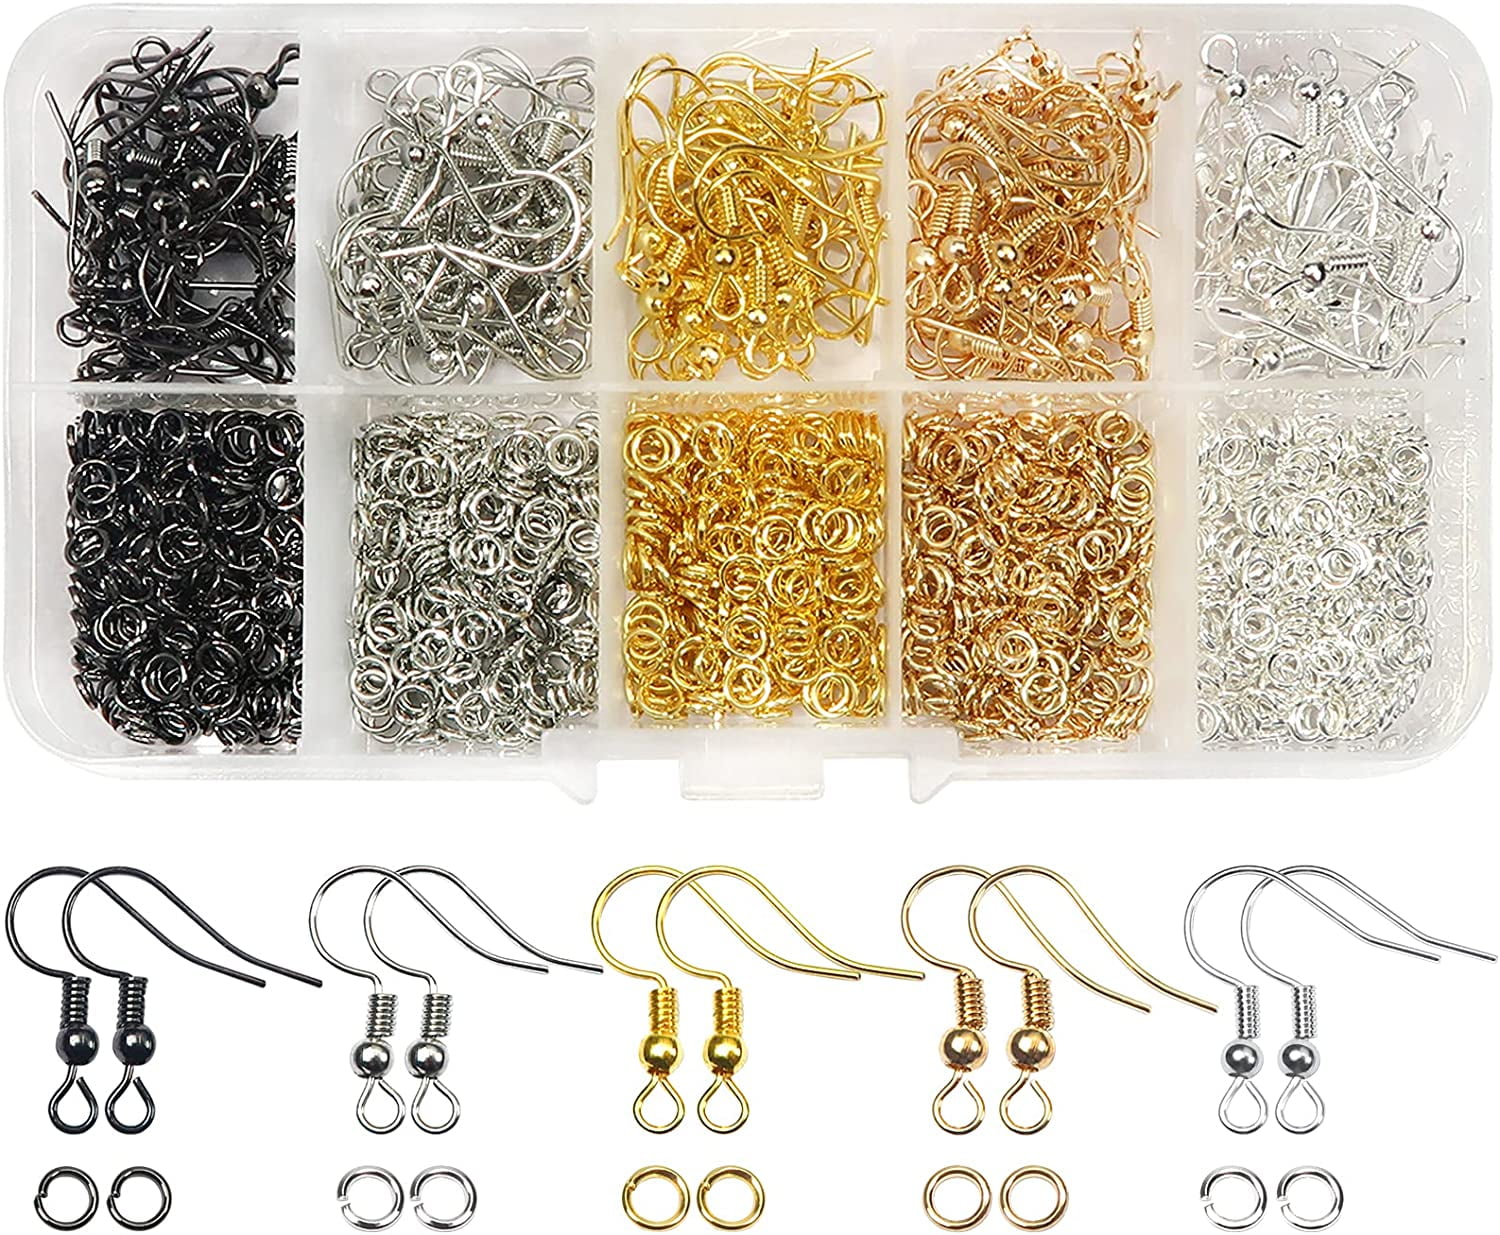 TINYSOME 450 Pcs/Lot Hypoallergenic Earring Hooks Kit Mix-color Ear Wires  Fish Hooks 